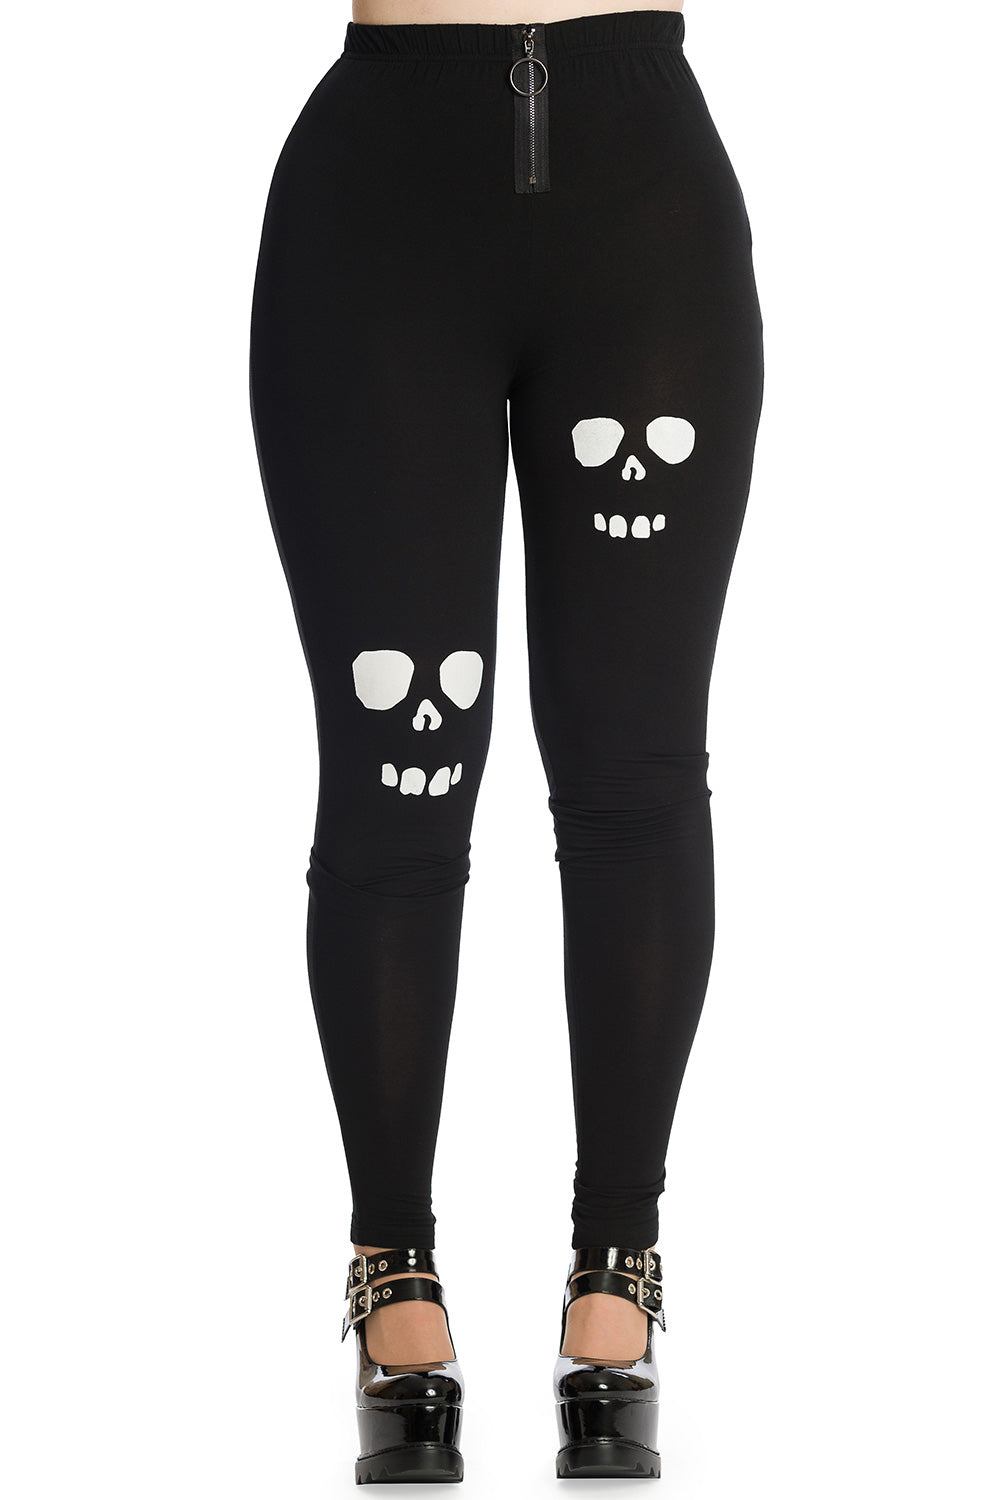 High waisted black leggings with zip front and dark soul inspired face motifs 